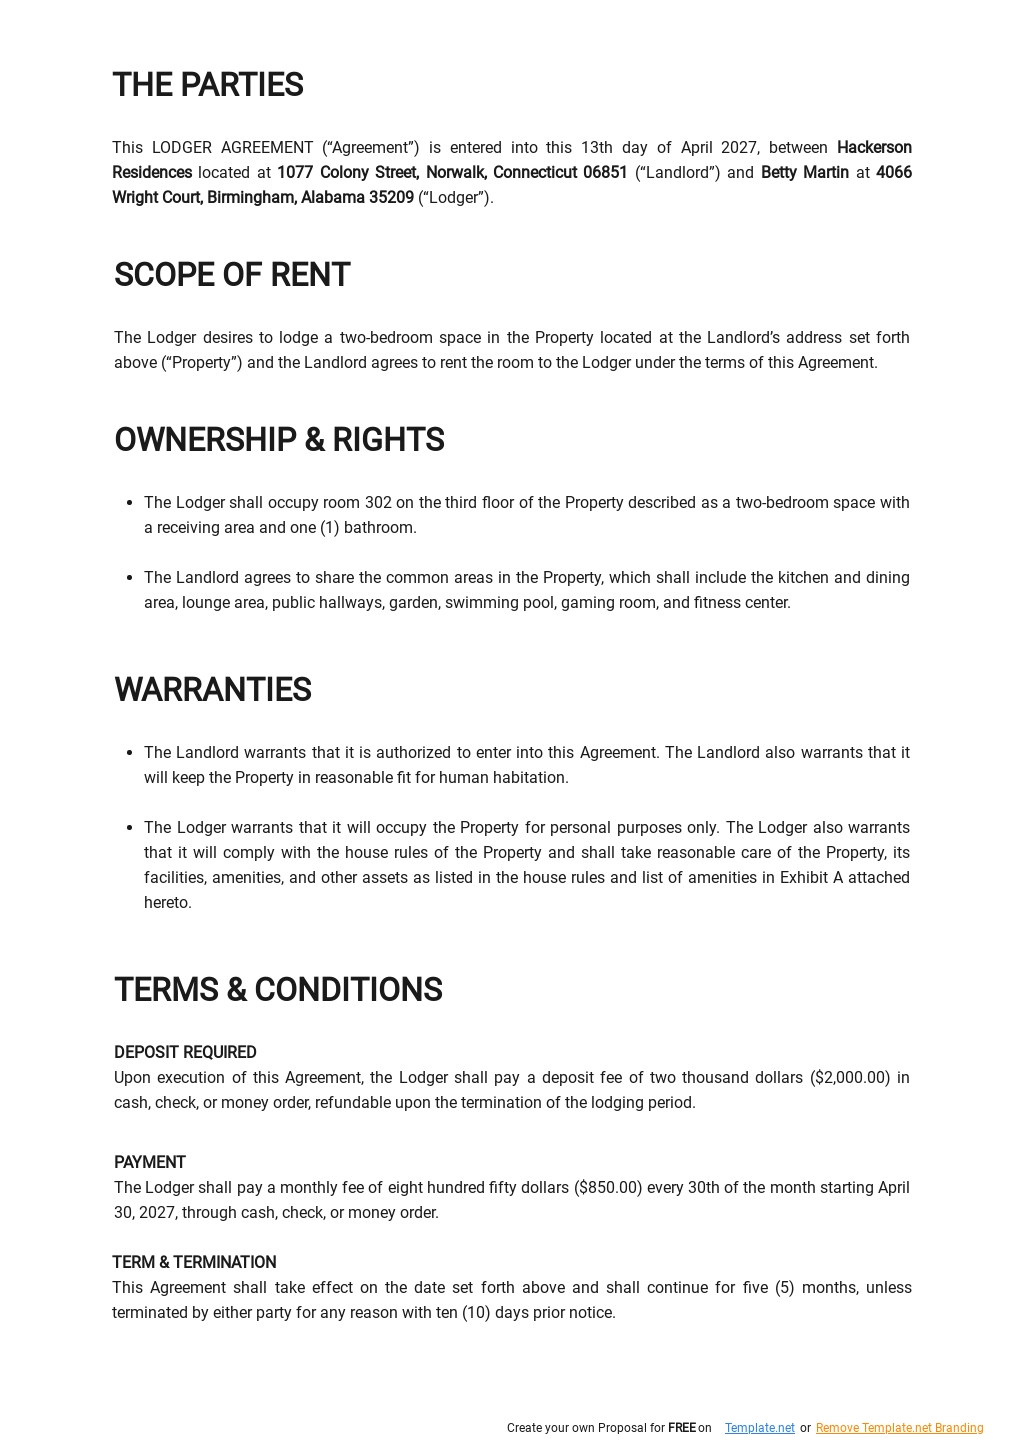 FREE Basic Lodger Agreement Template